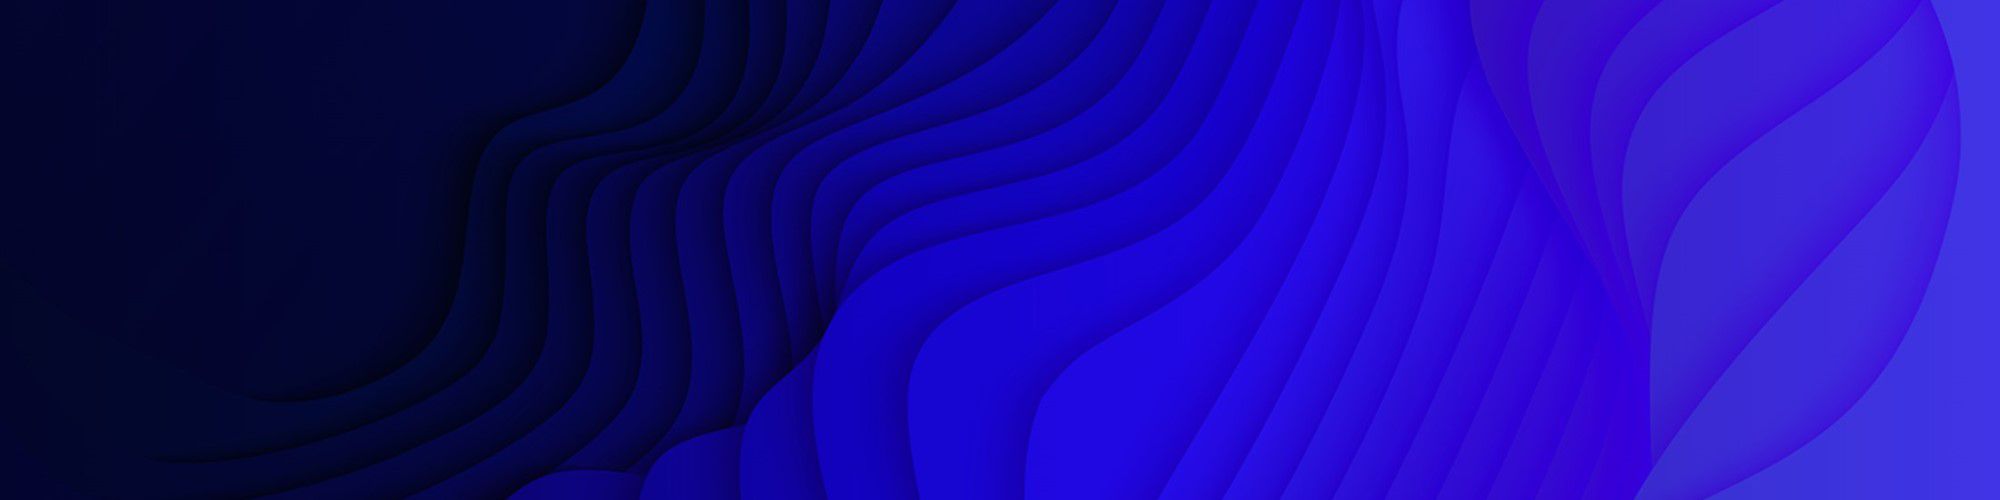 blue-waves-abstract-banner